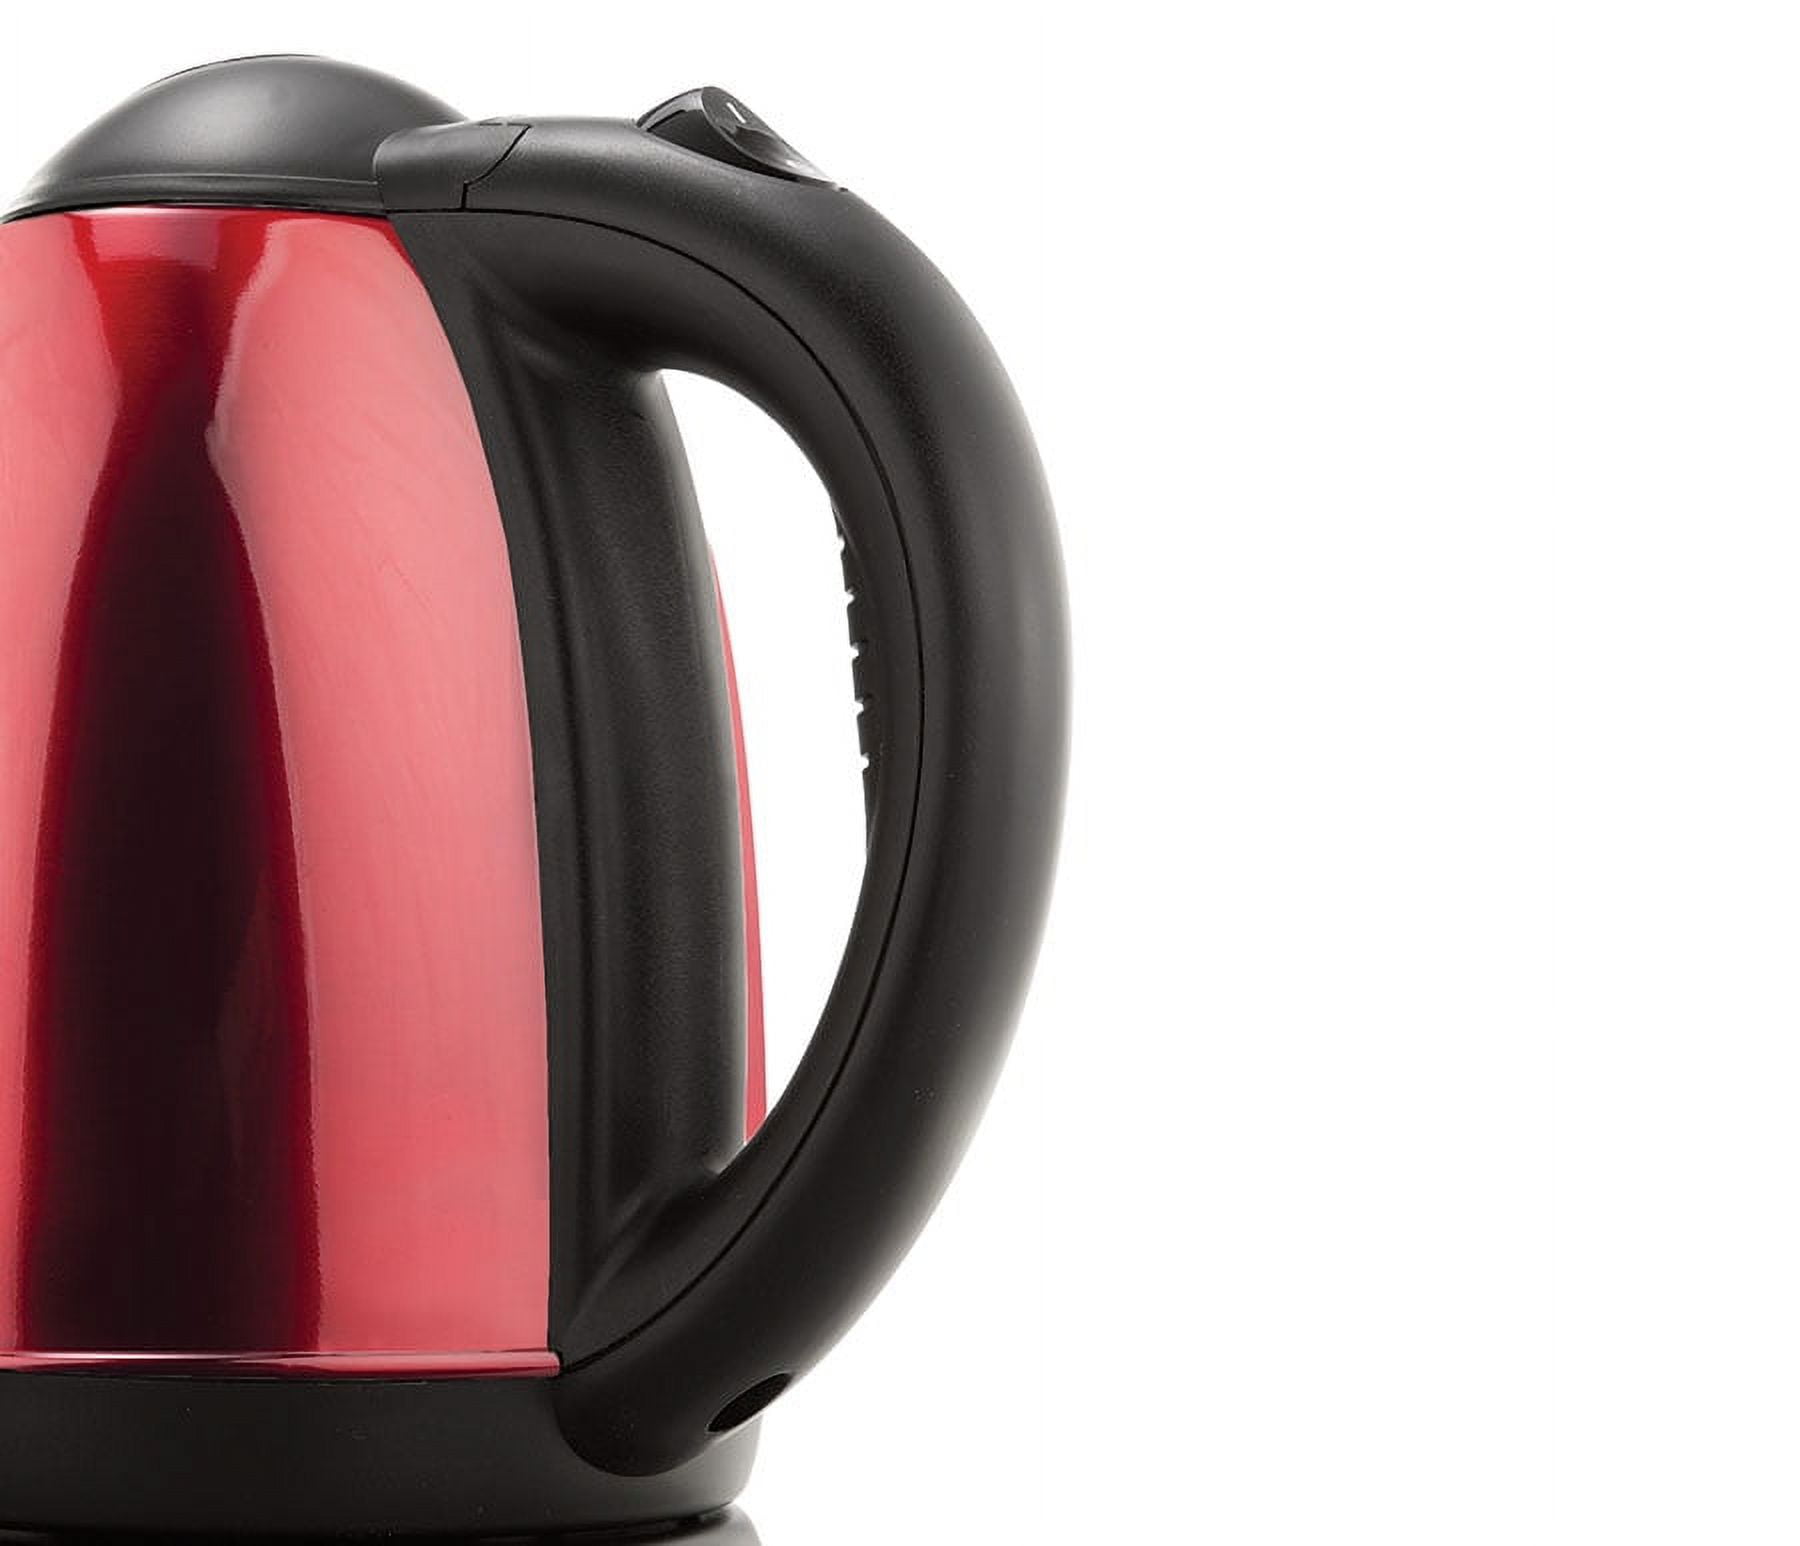 Courant 1.5 Liter Cordless Stainless Steel Electric Kettle - Red, 1 - Kroger